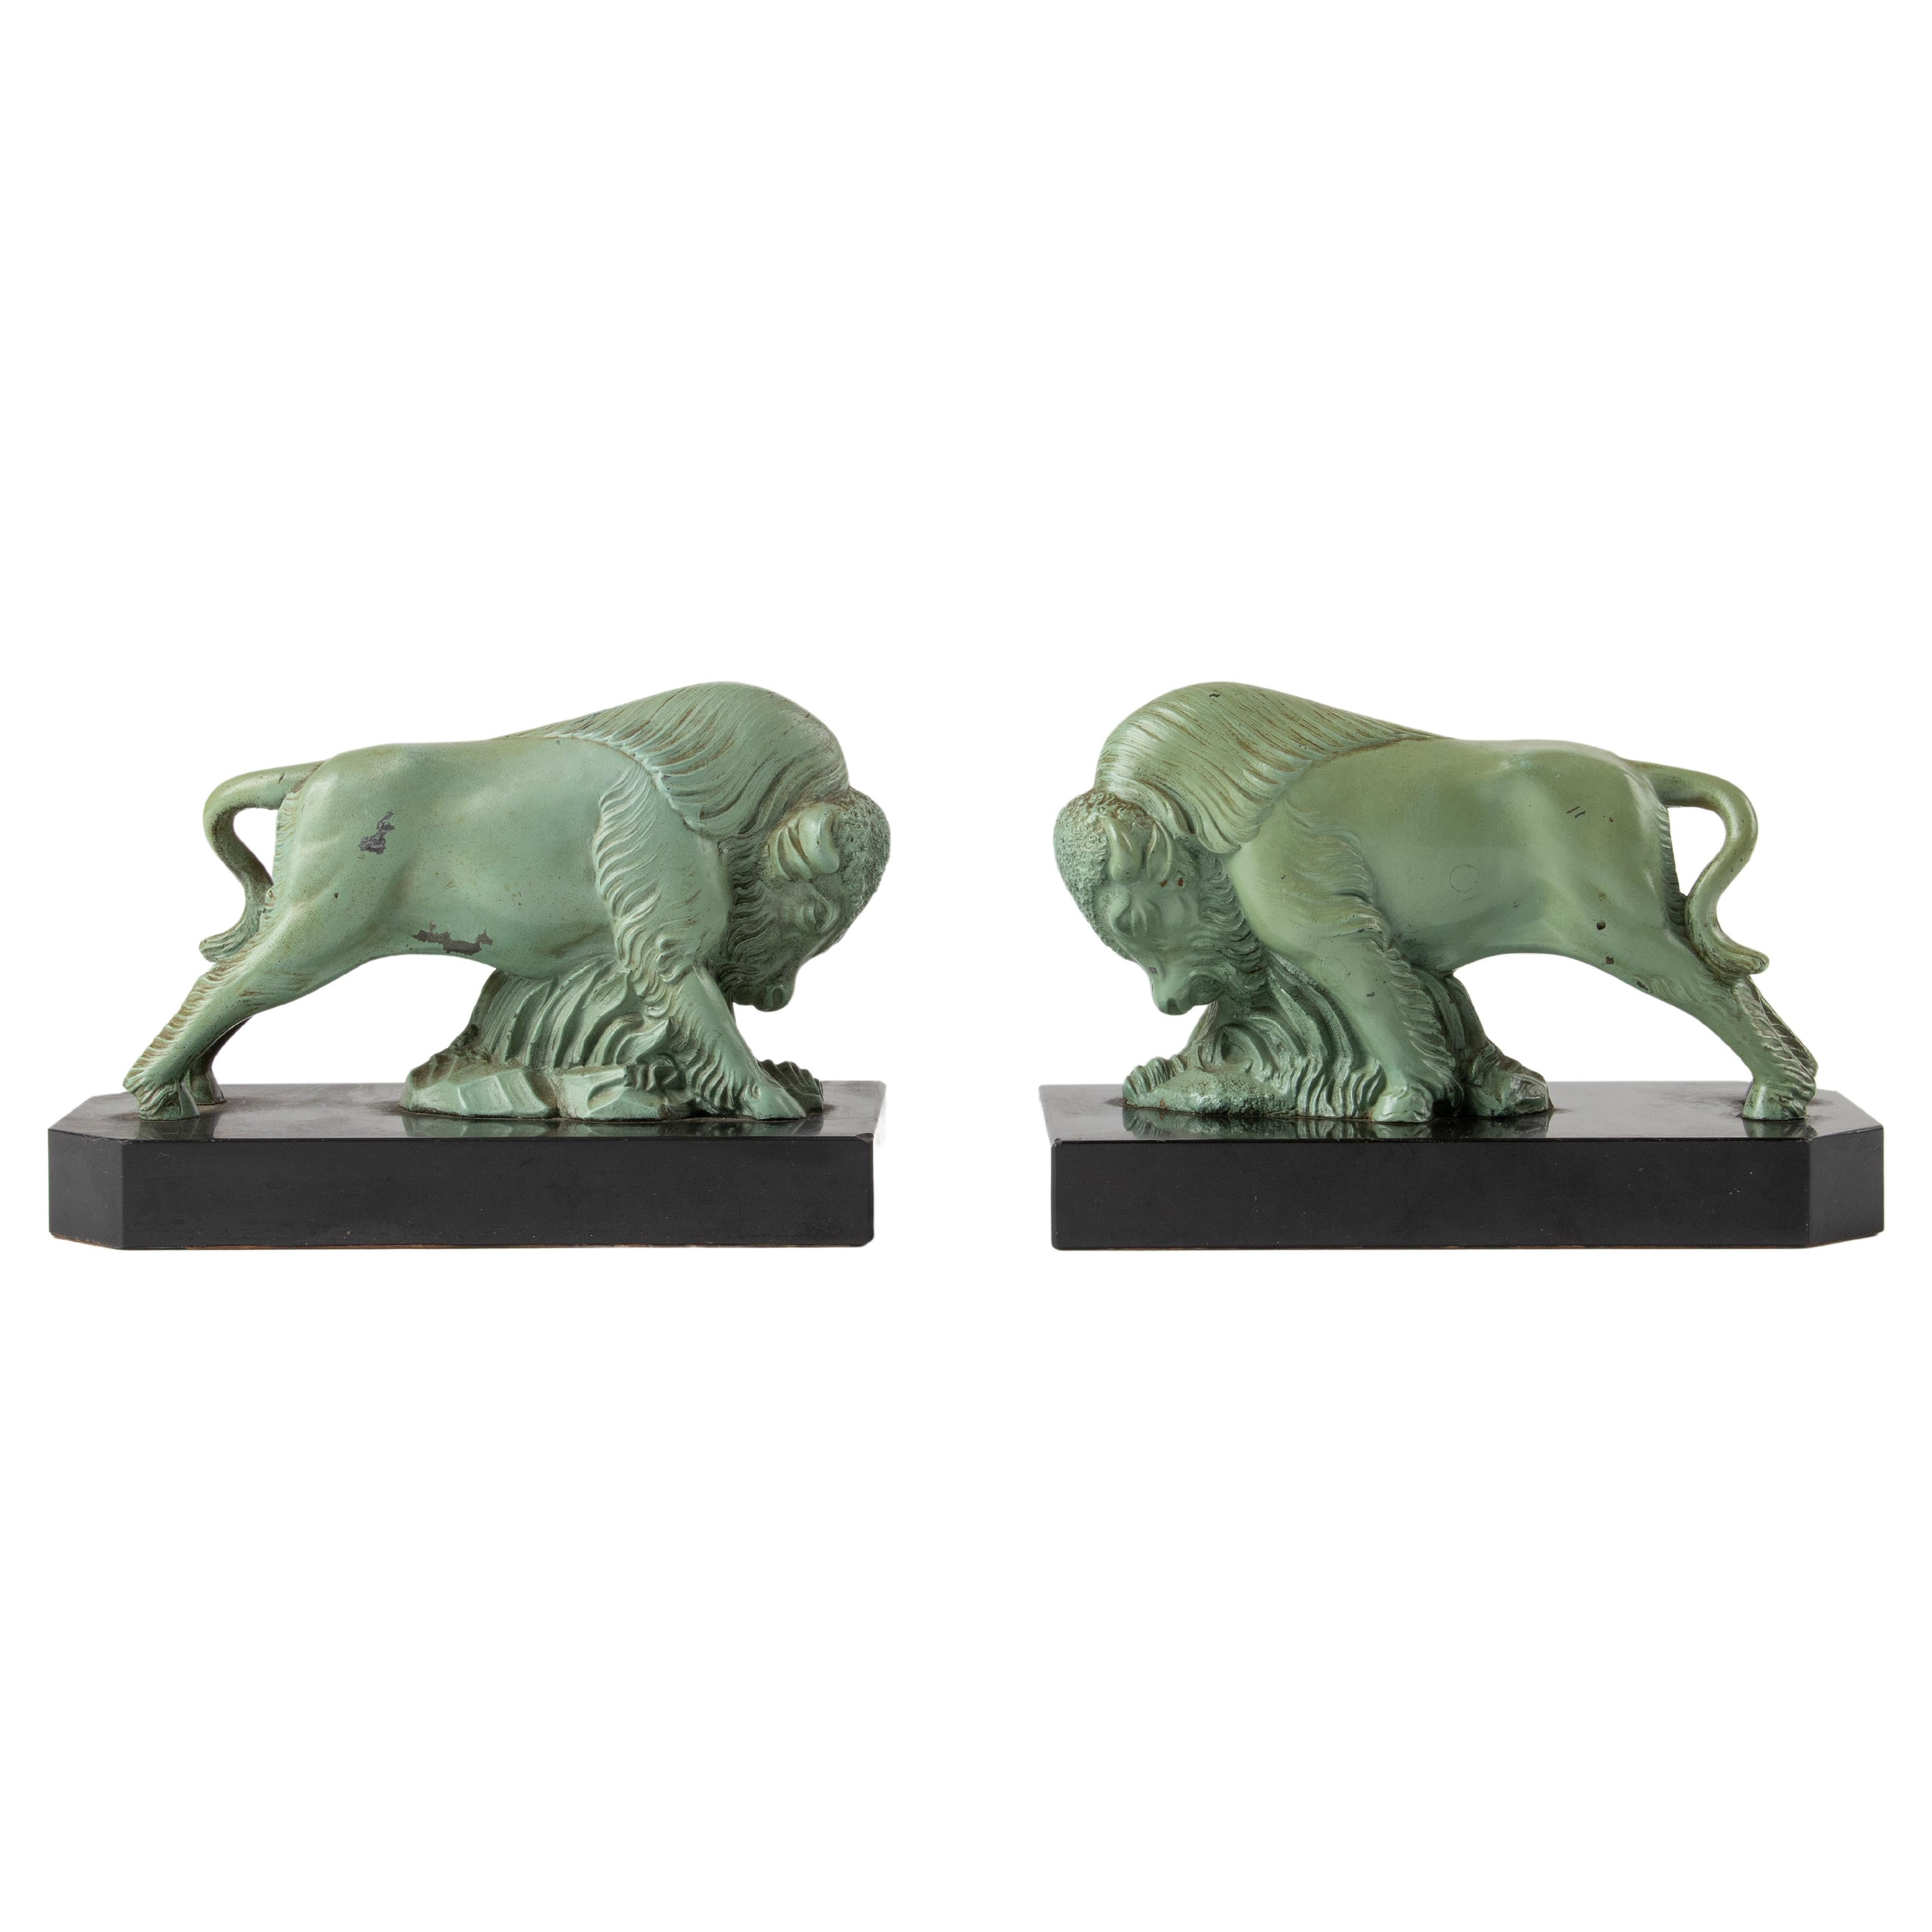 Pair of 1930's Art Deco Book Ends with Bison Made of Marble and Spelter